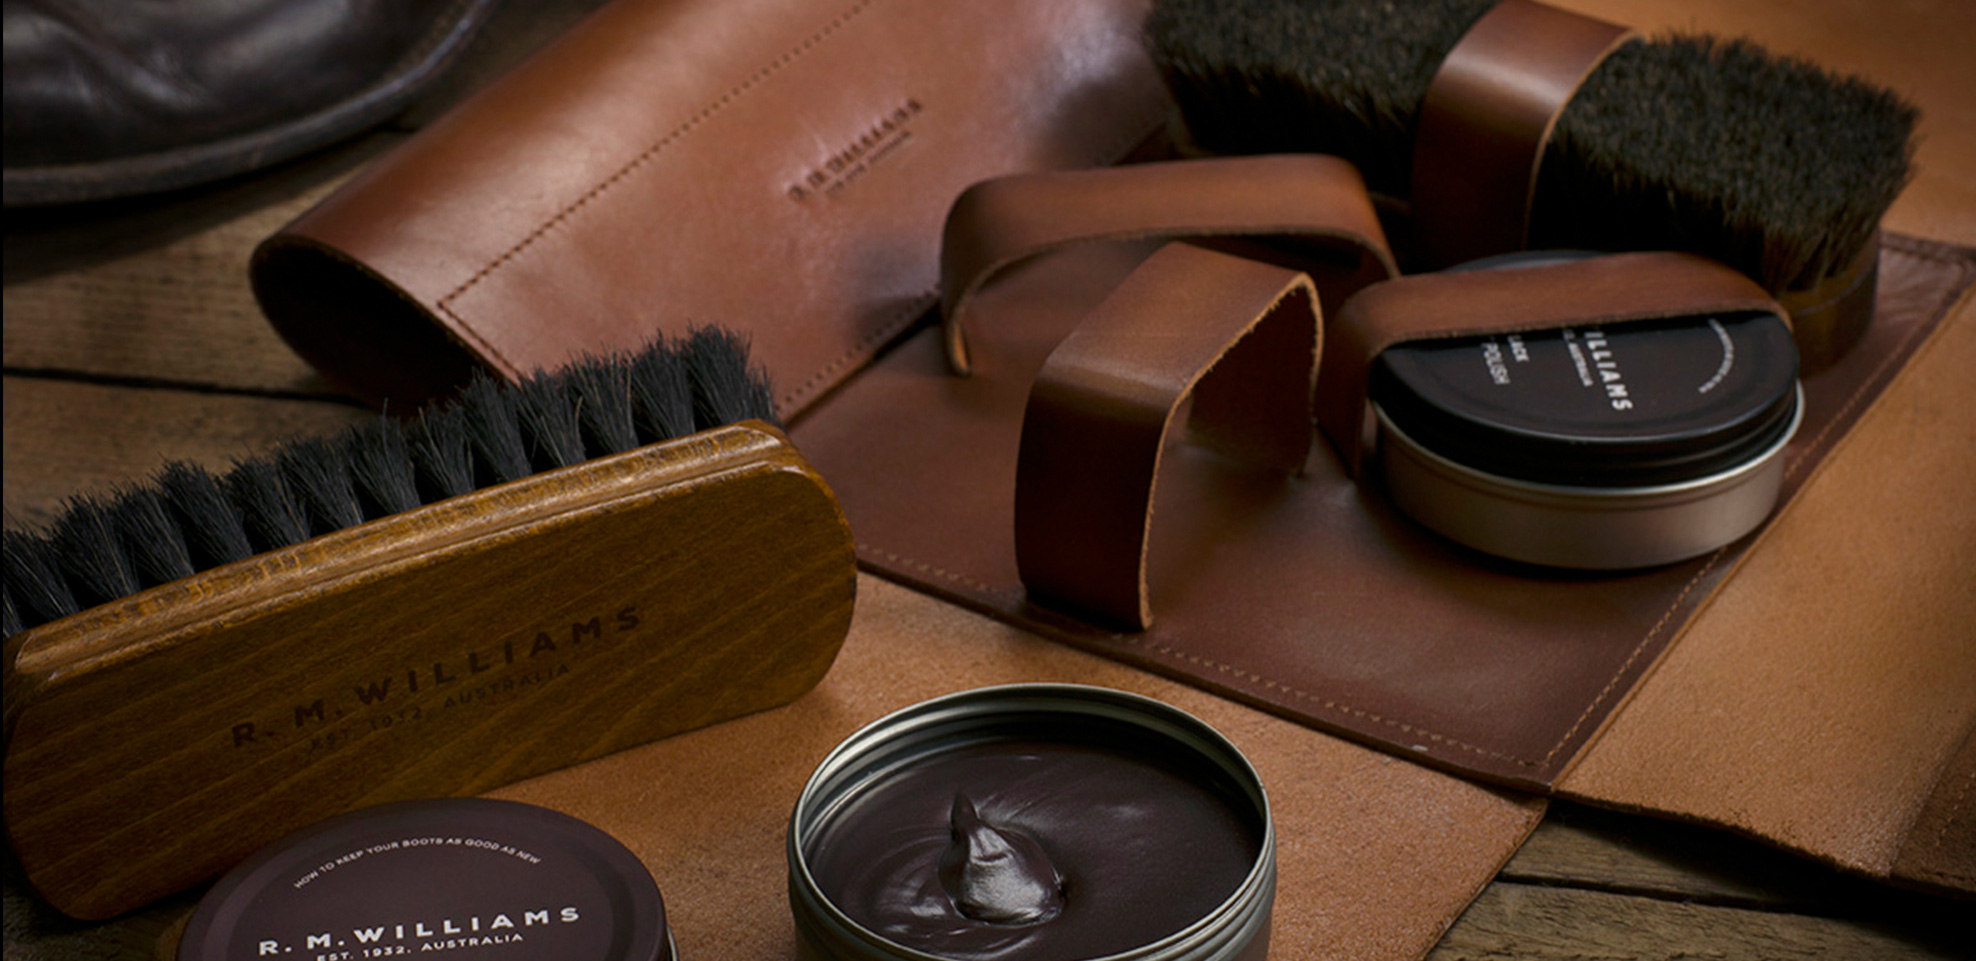 best leather boot care kit